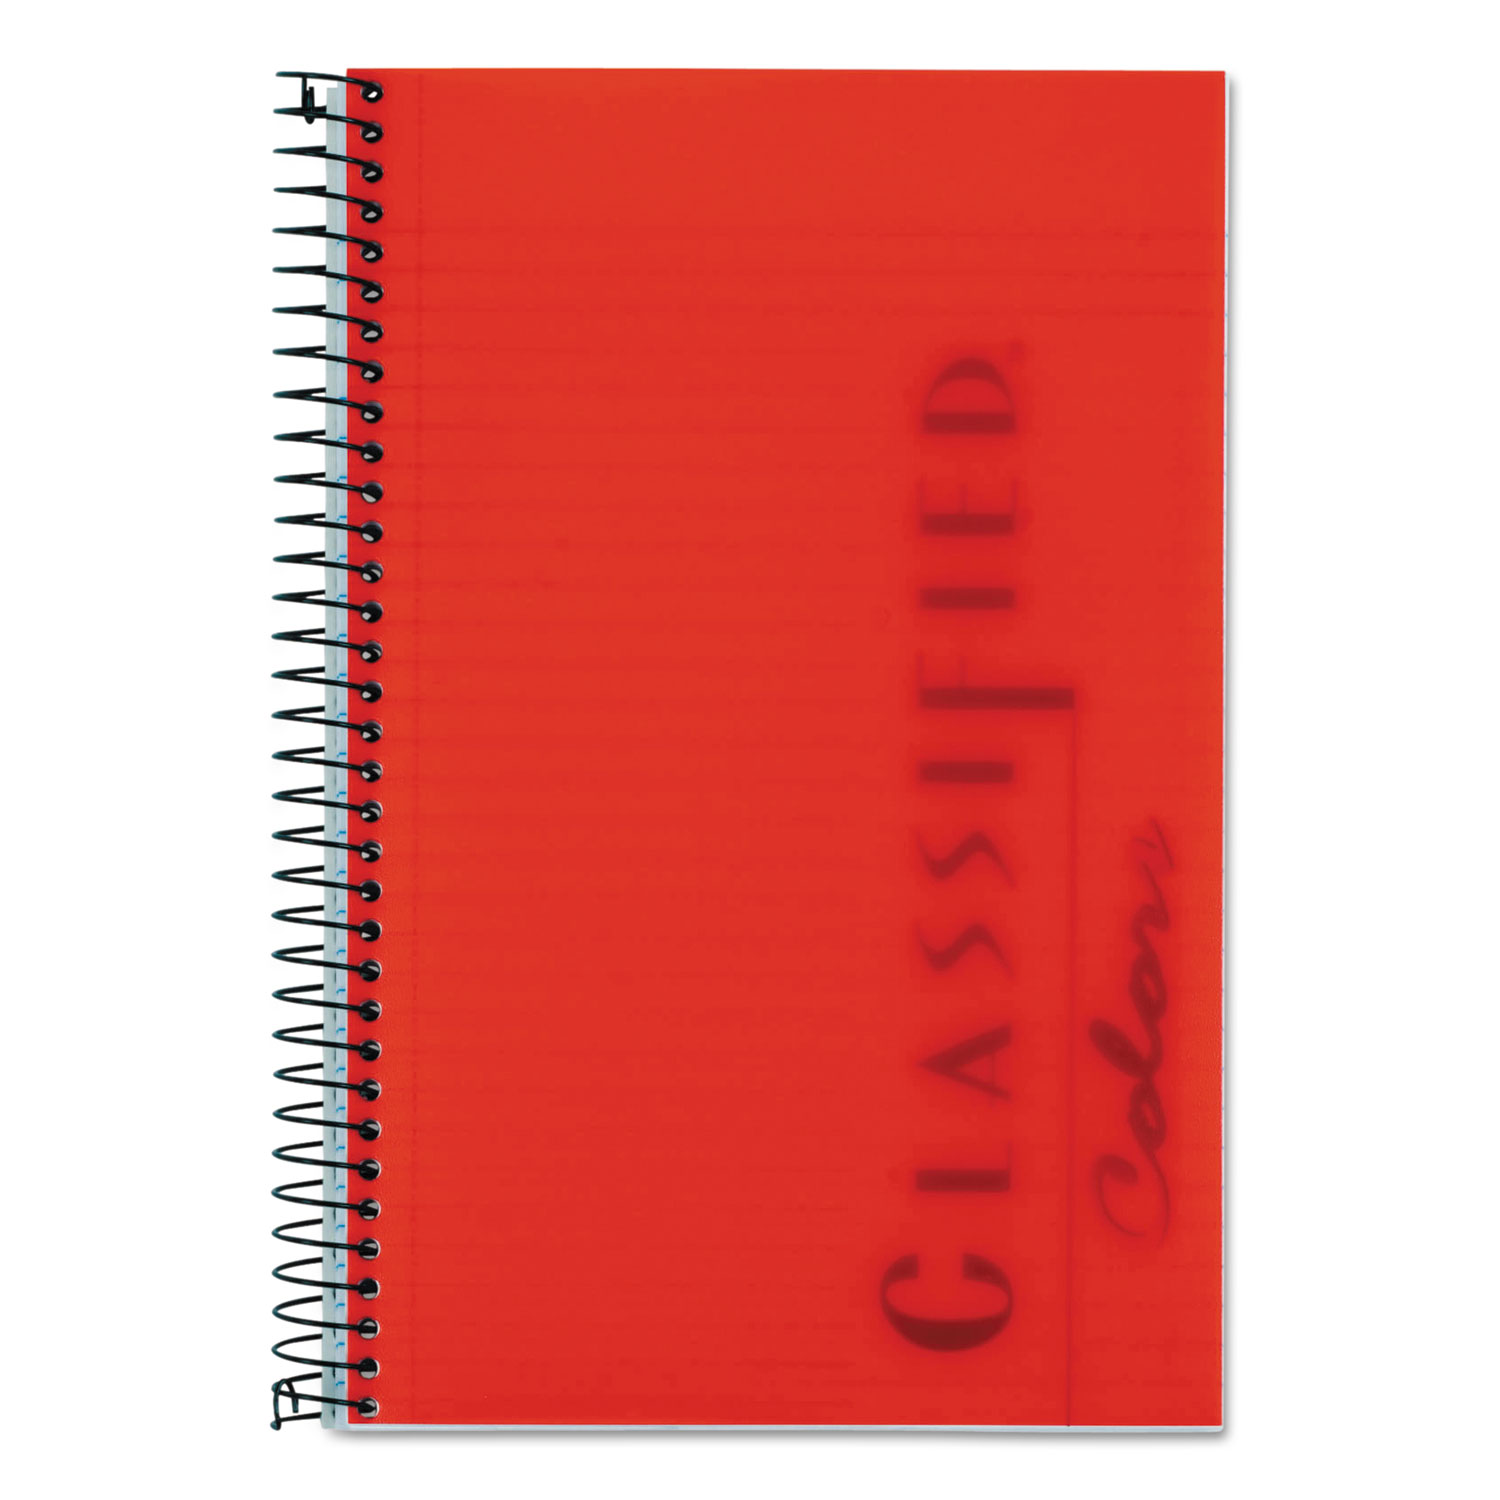  TOPS 73505 Color Notebooks, 1 Subject, Narrow Rule, Ruby Red Cover, 8.5 x 5.5, 100 Sheets (TOP73505) 